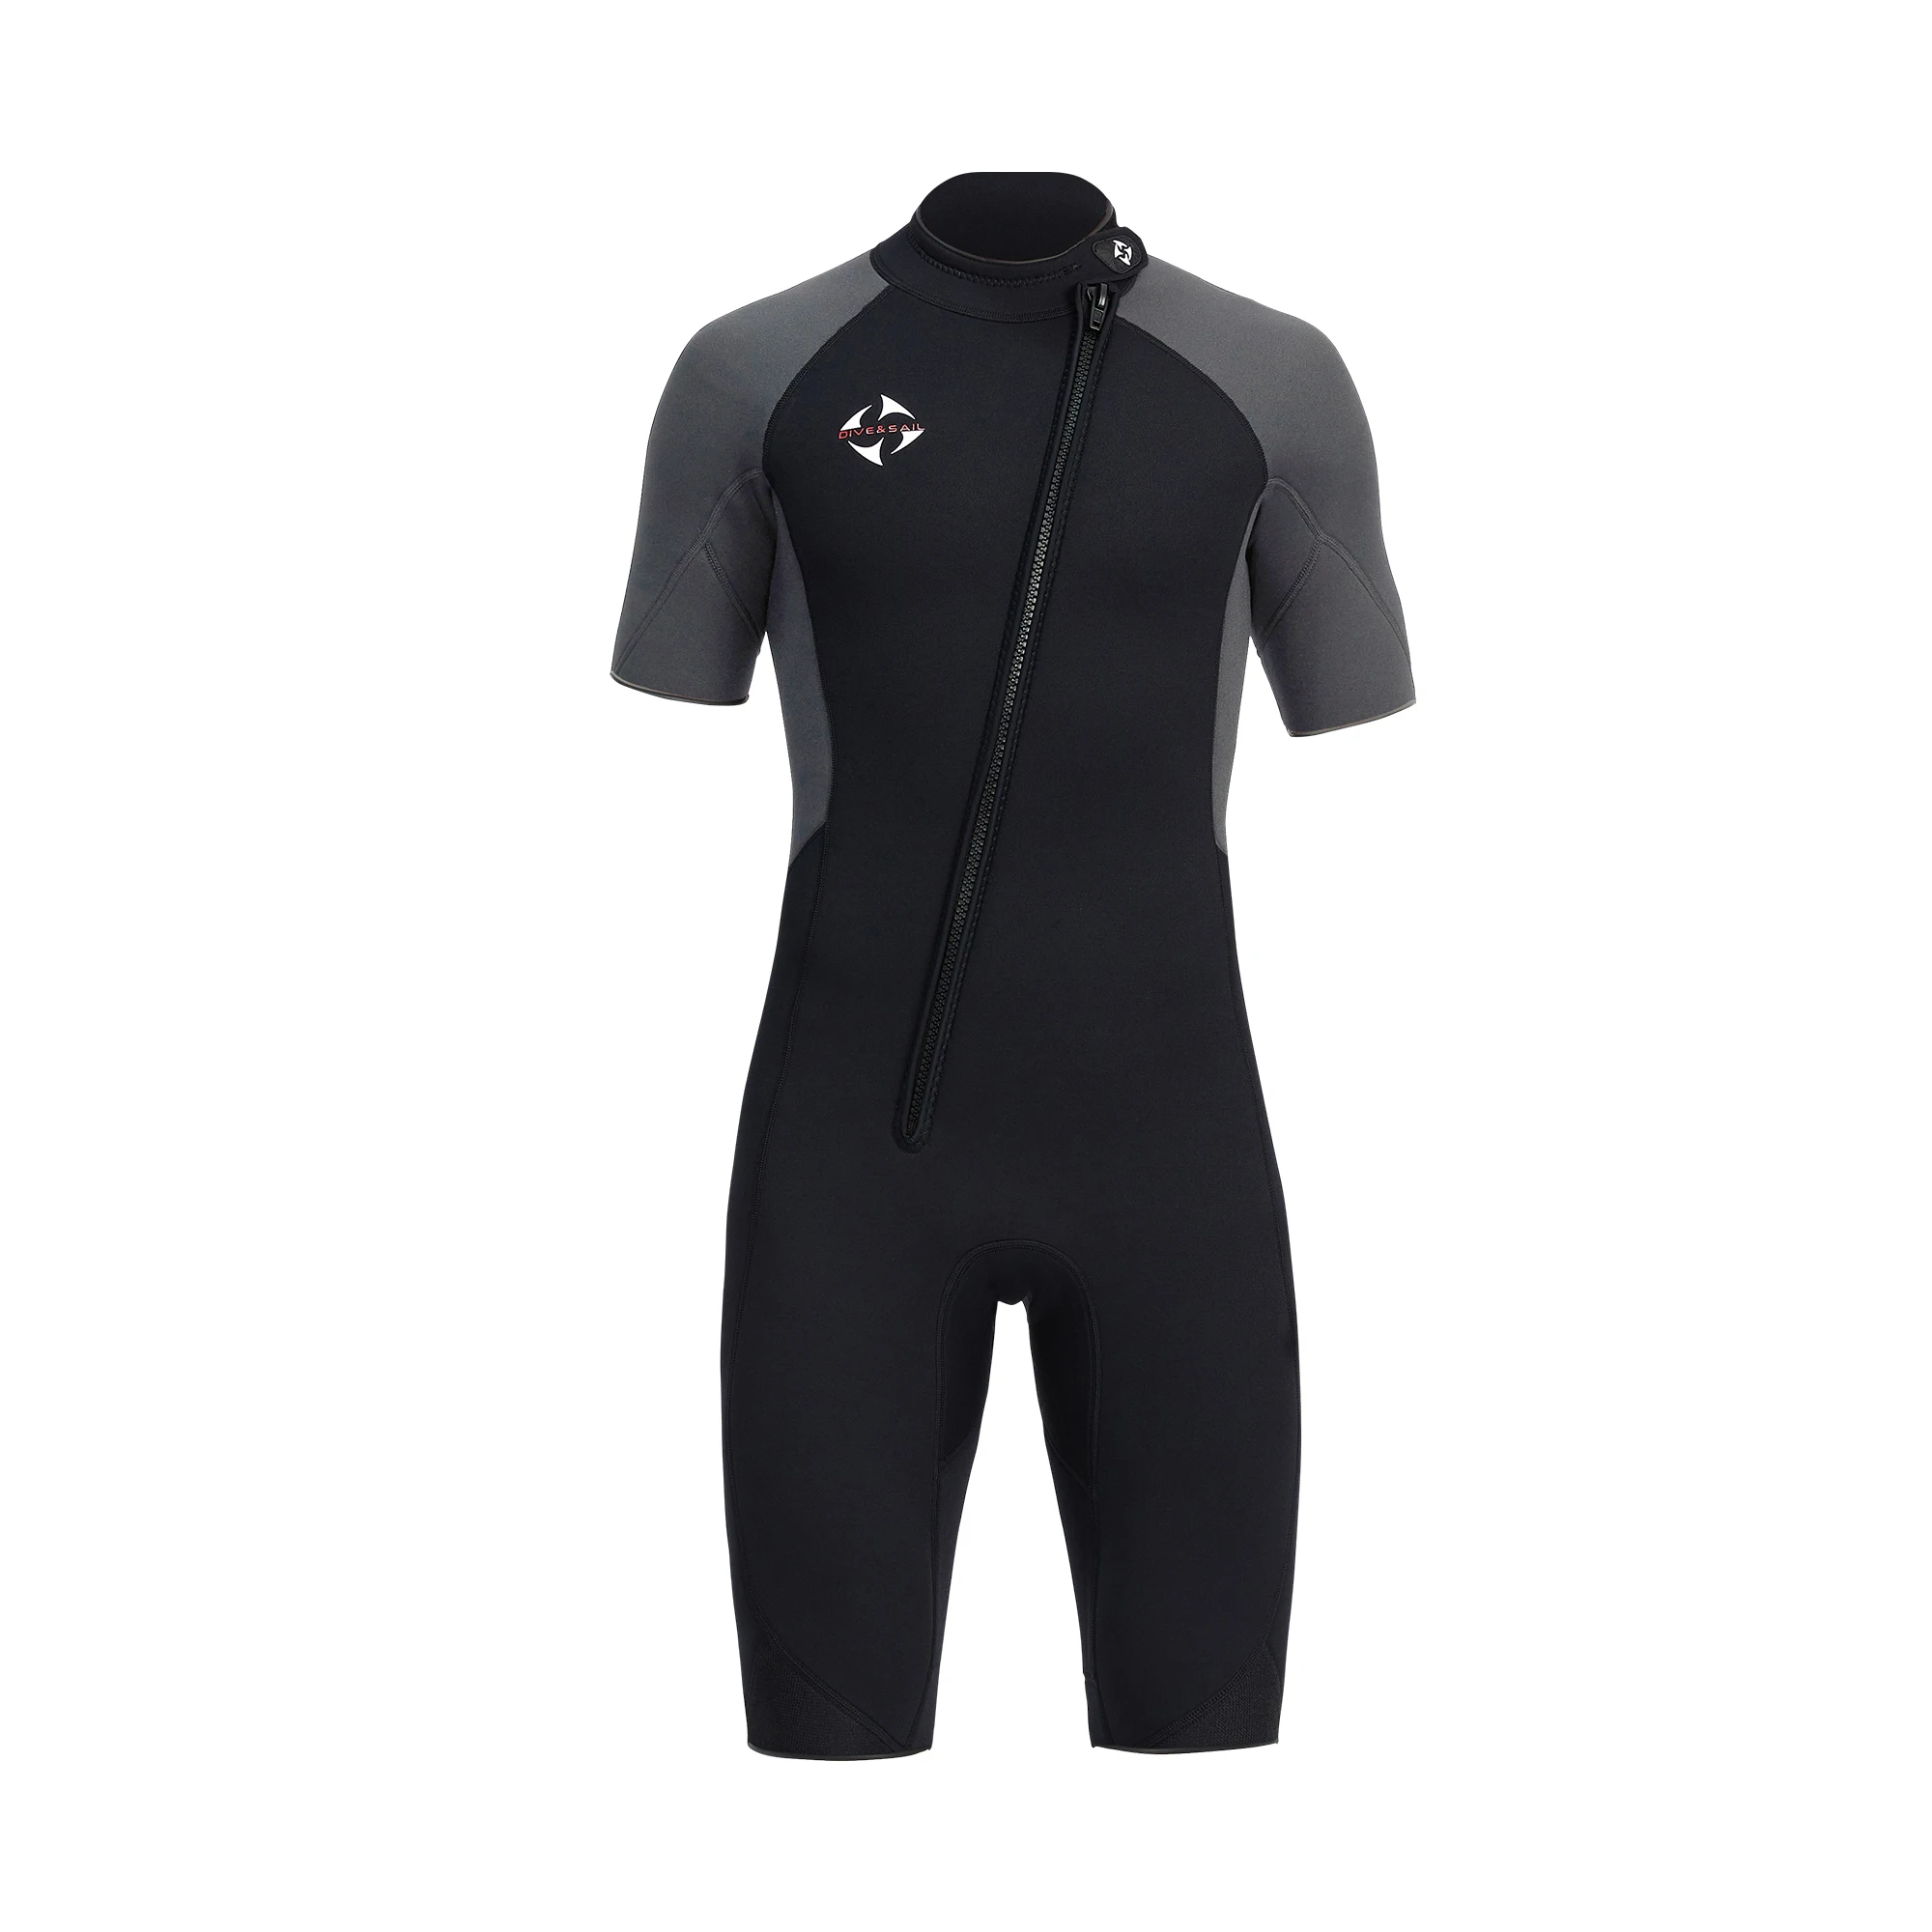 Men 3mm Shorty Wetsuit Full Body Surf Diving Suit Male Thick Thermal Neoprene Swimsuit Scuba Wet Suits For Snorkeling Kayaking